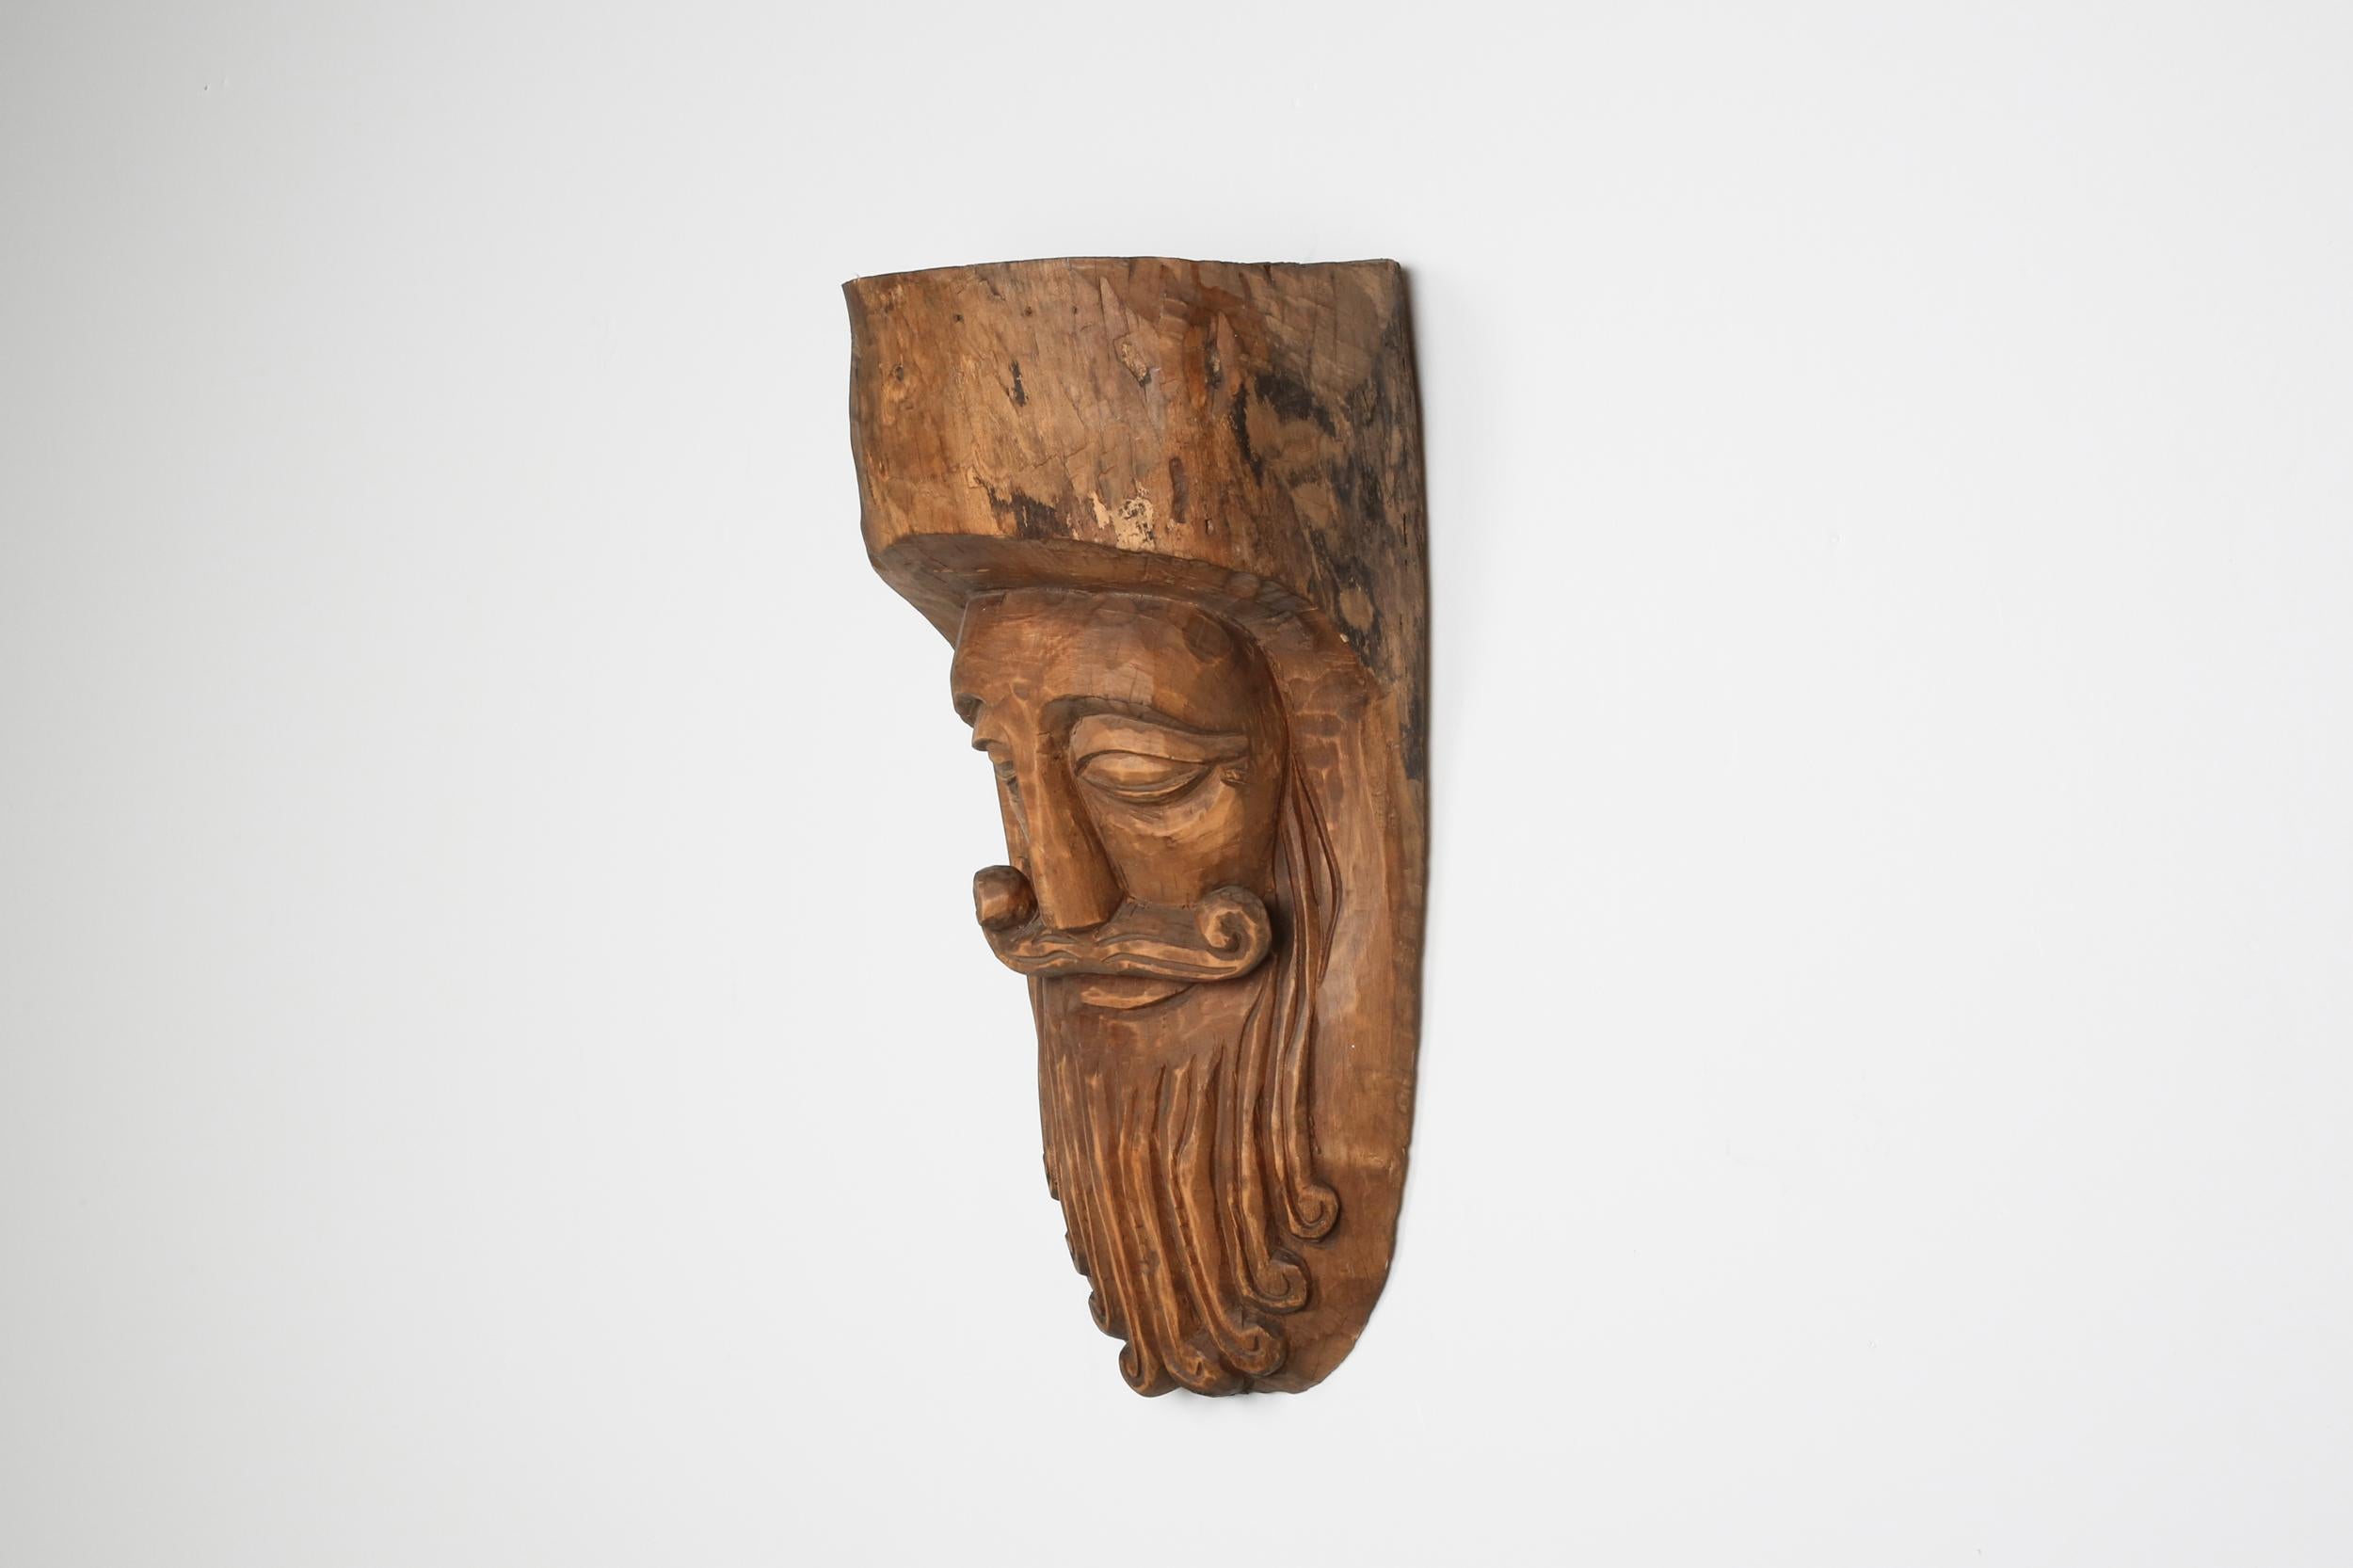 Rustic; folk art; mask; Axel Vervoordt

This Rustic looking mask has a soft and elegant expression, closed eyes, and a finely carved mustache.
The encrusted patina inside and out from traditional use. 

Would fit well in an Axel Vervoorst style